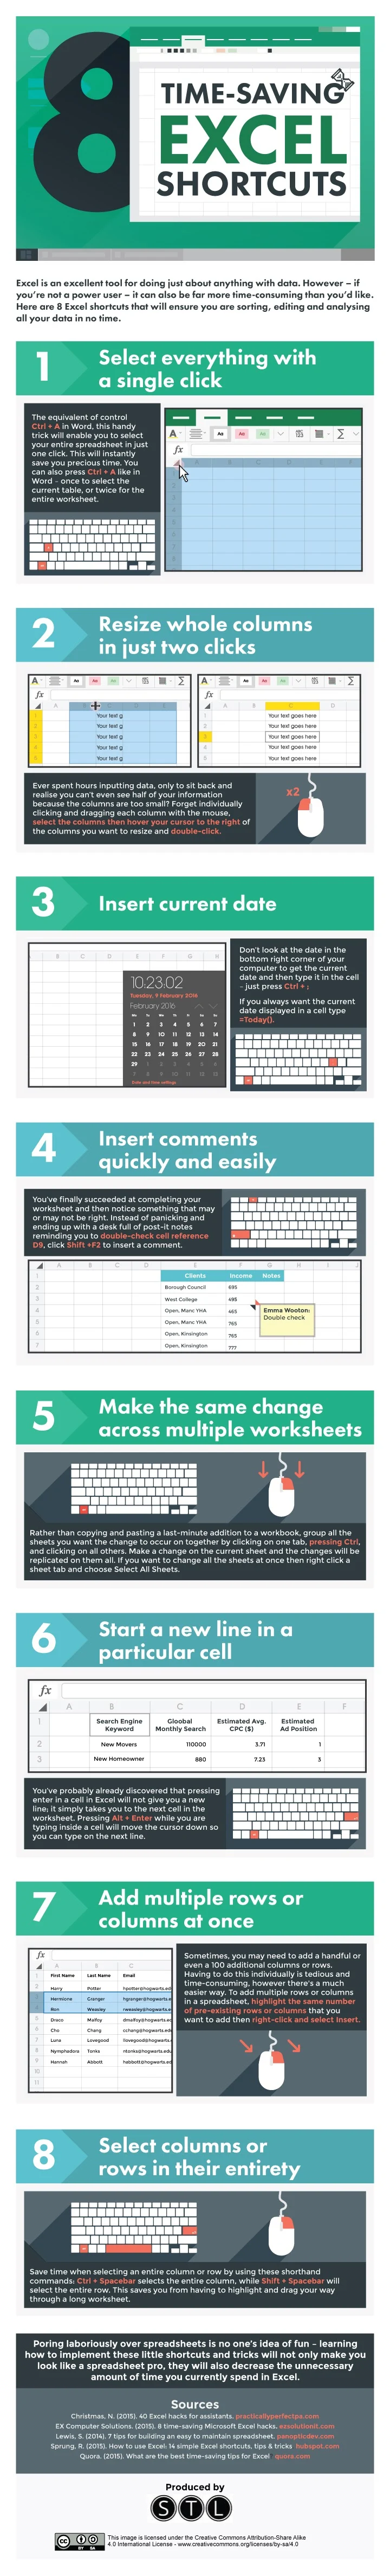 8 time saving shortcuts in Excel - #infographic